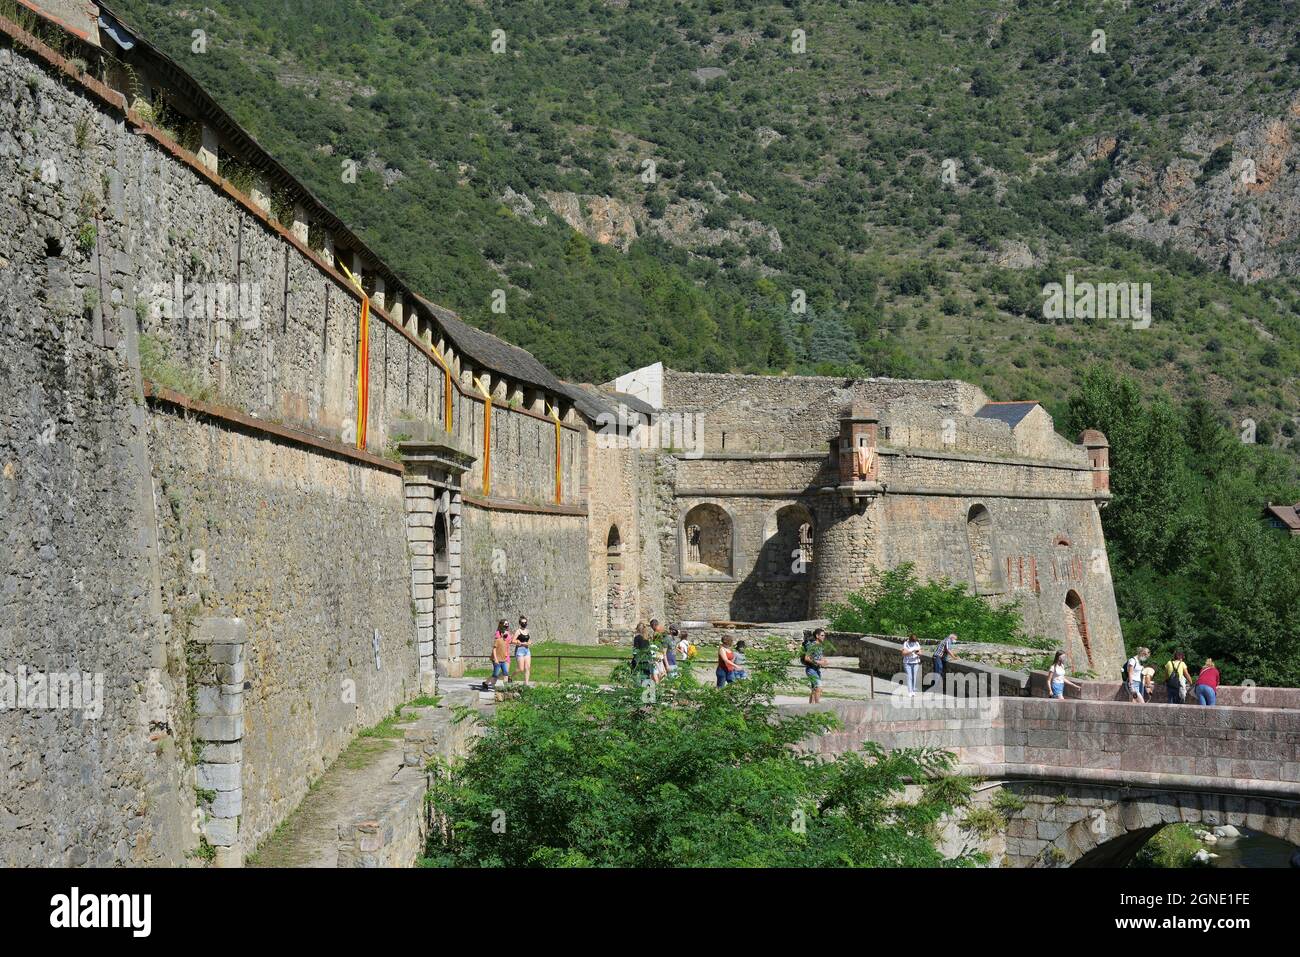 The medieval village of Villafranca de Conflent is located in the historical region of Conflent, France Stock Photo